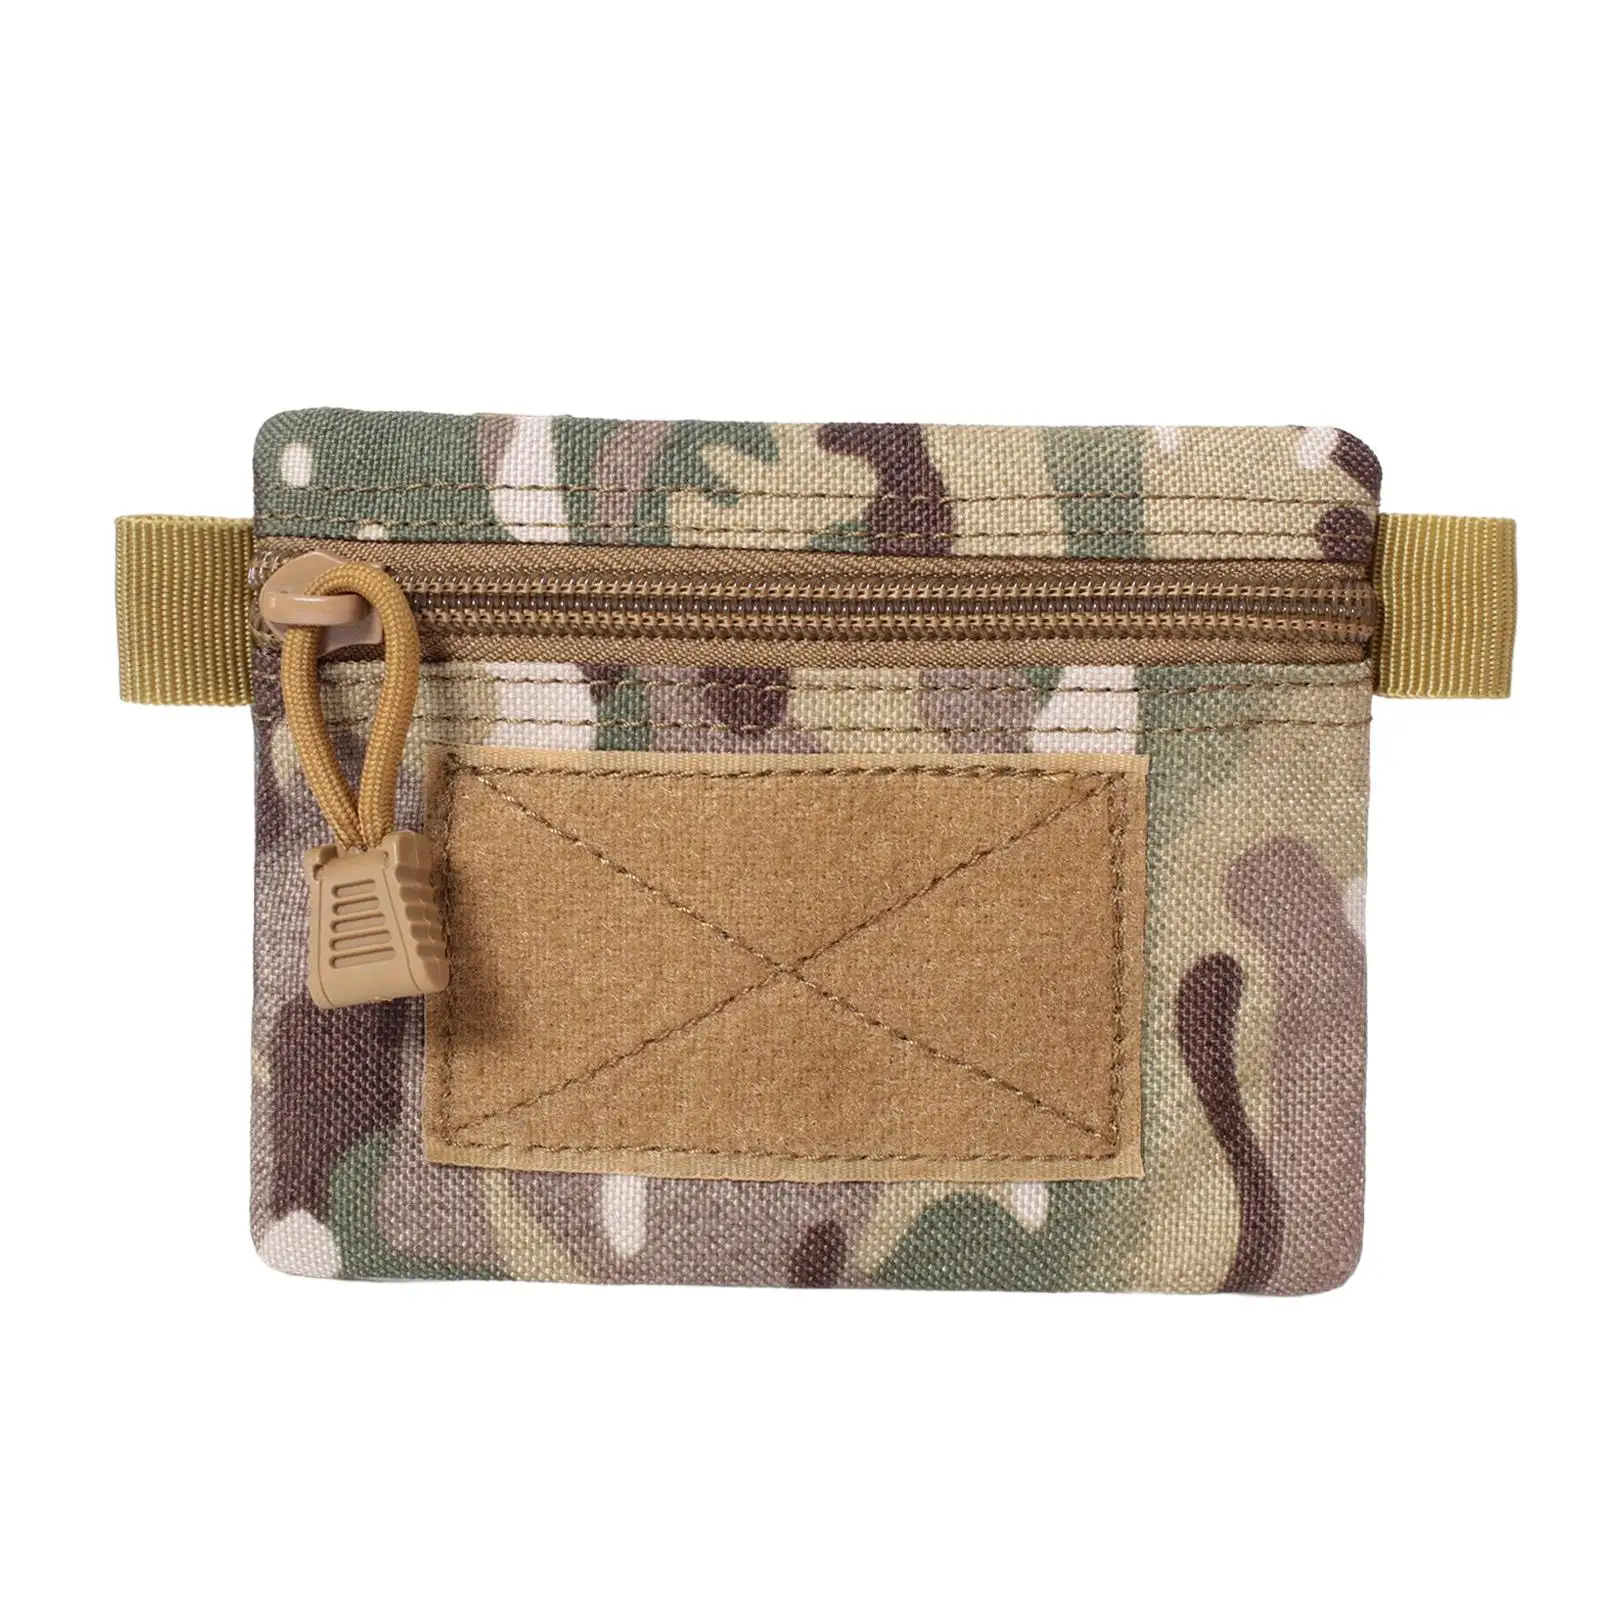 Outdoor Wallet Nylon Pouch Waist Bag Credit Card Storage Cards Holder for Outdoor Hunting